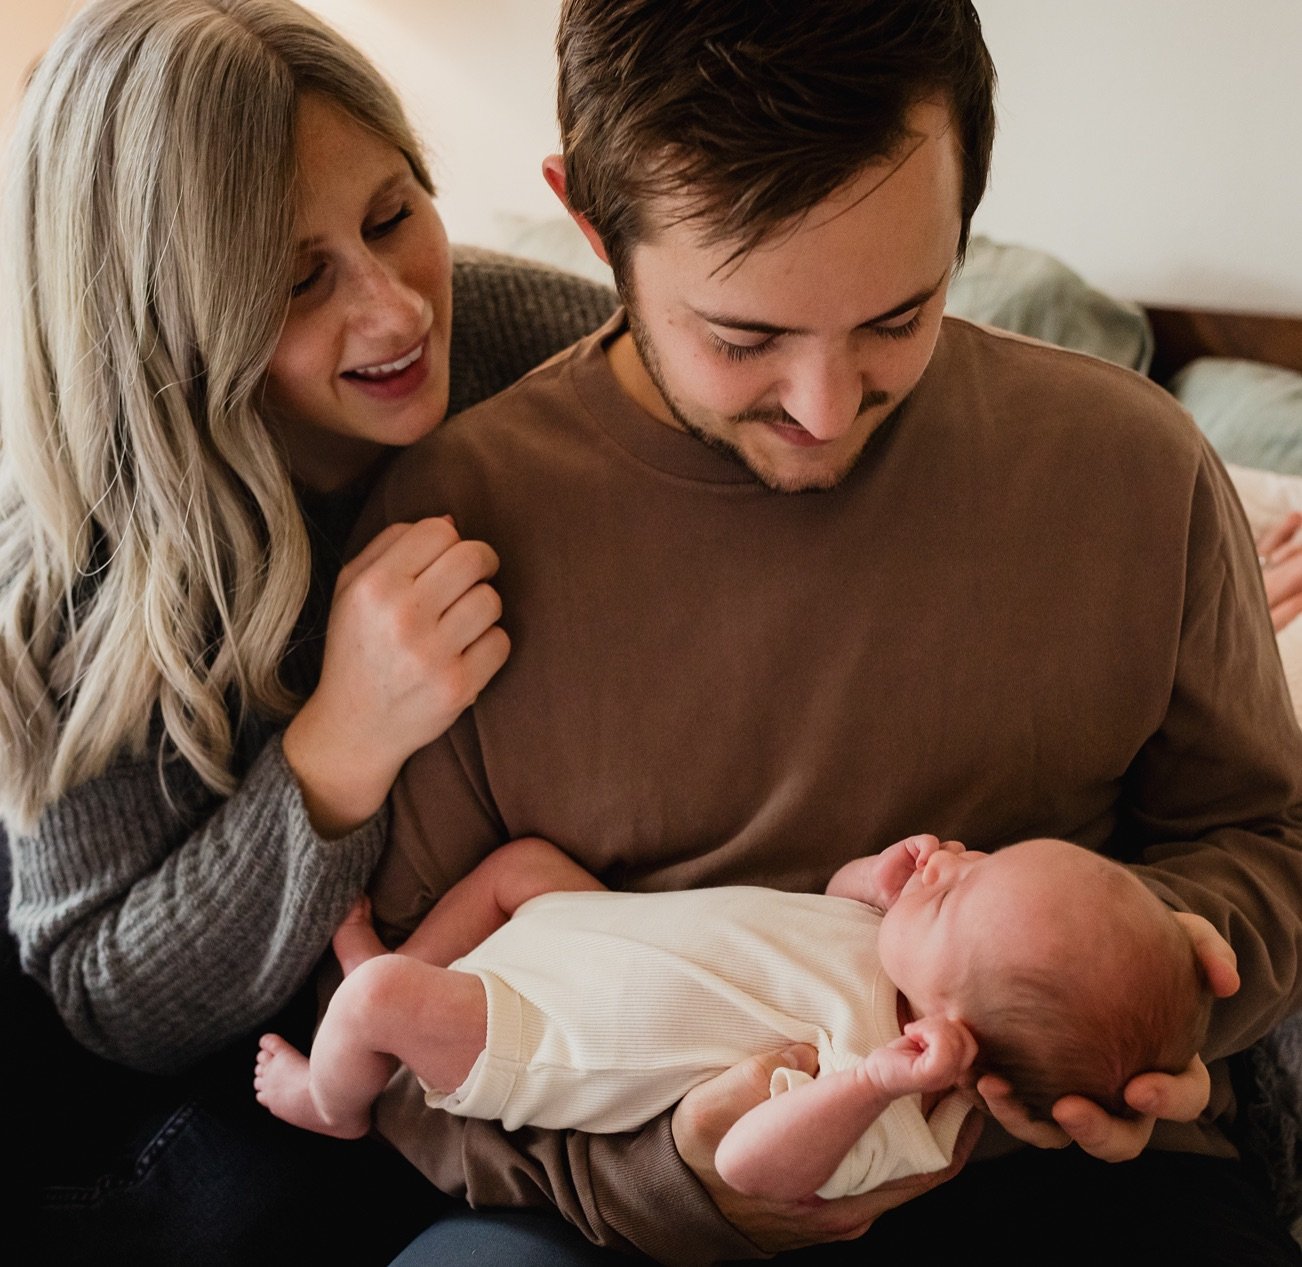 The first days at home with your new baby are pure magic. And sometimes a little bit hard too. Caring for a baby is a new skill and it takes time to get the hang of it. 

My daughter was a very tough newborn. I breastfed, she had colic and bad reflux